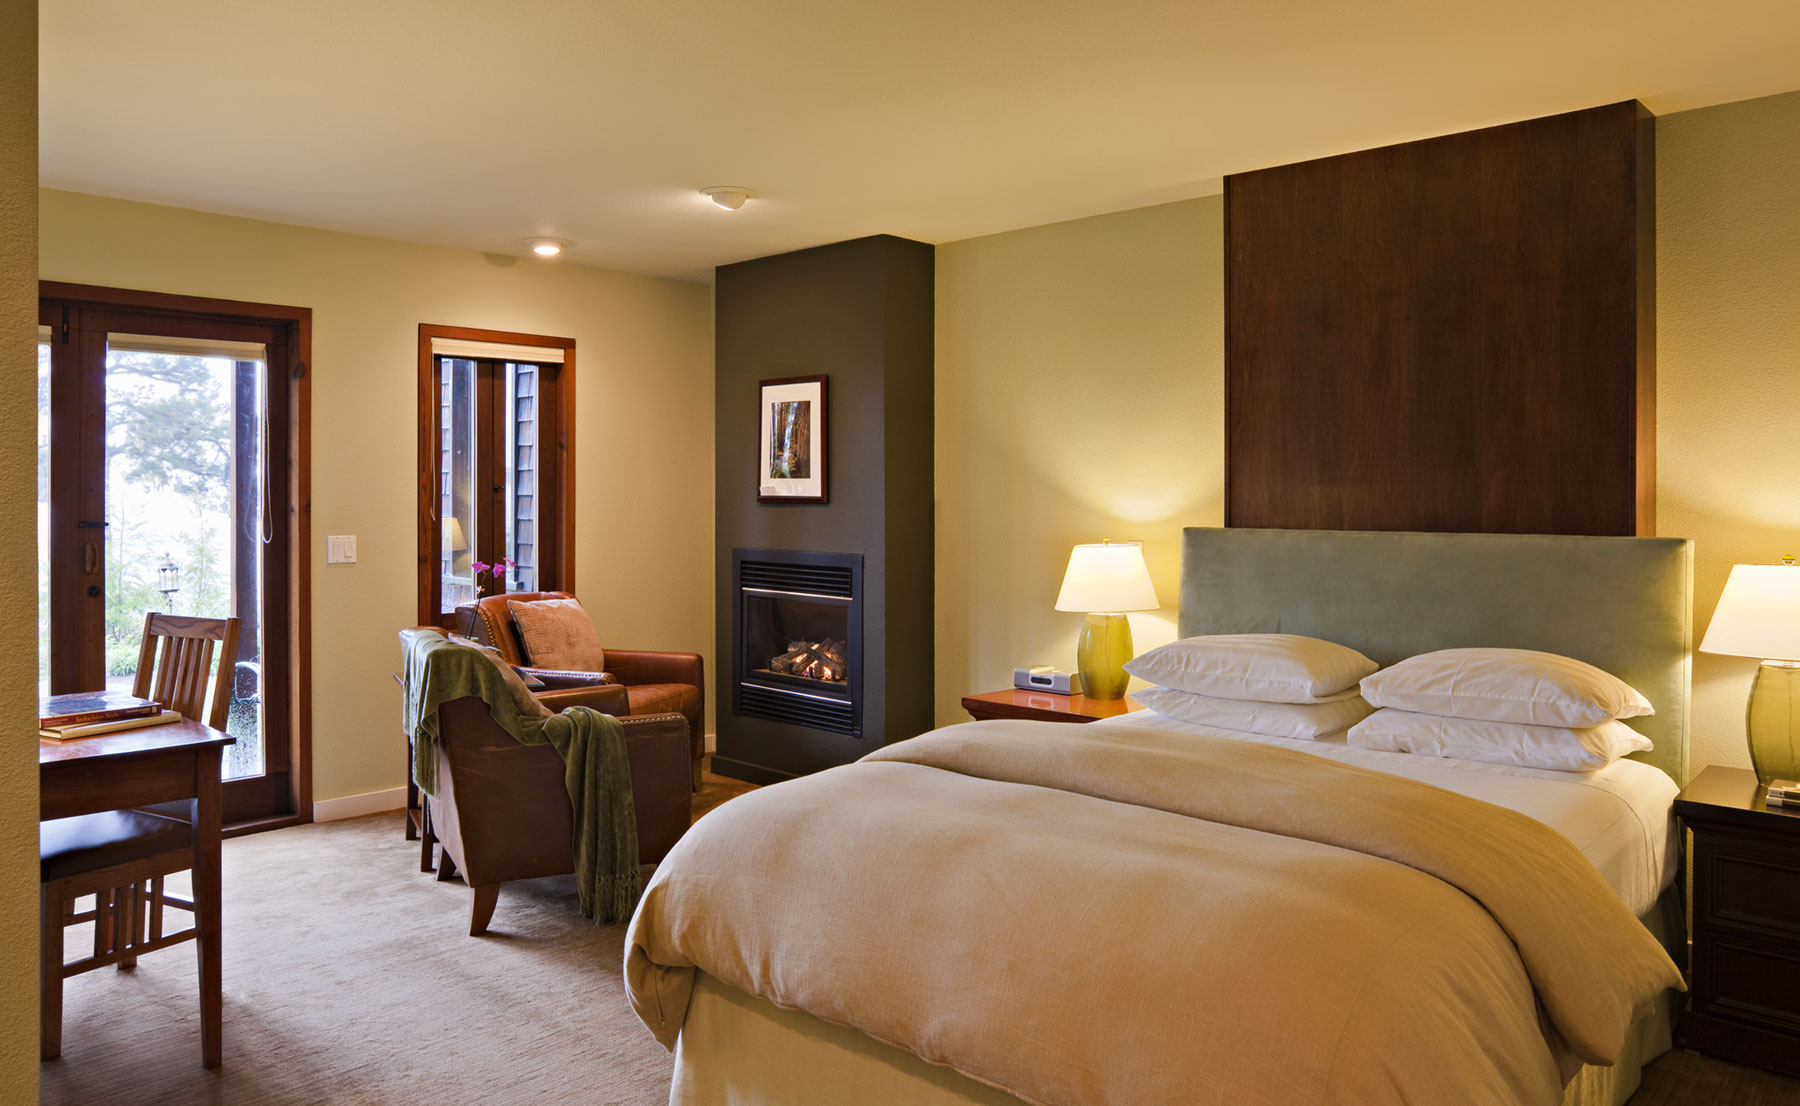 The ADA Accessible Redwood room with Queen bed, desk, French doors, and leather seating around a fireplace